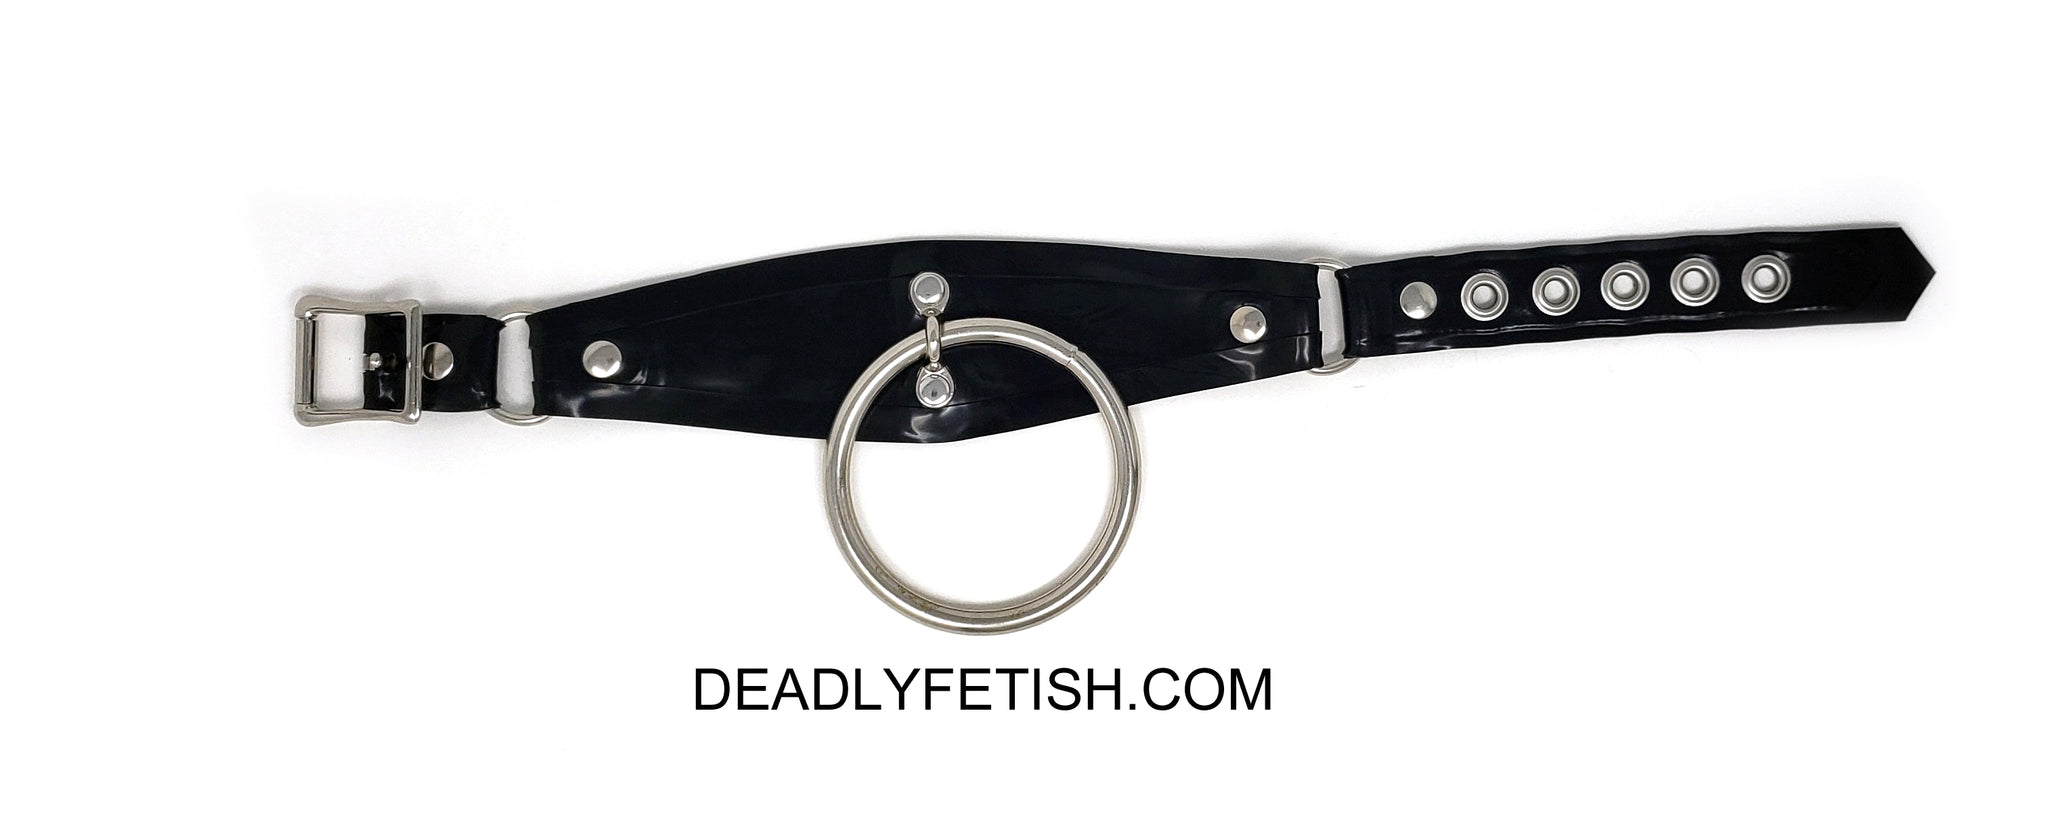 Deadly Fetish Made-To-Order Latex: Collar #14